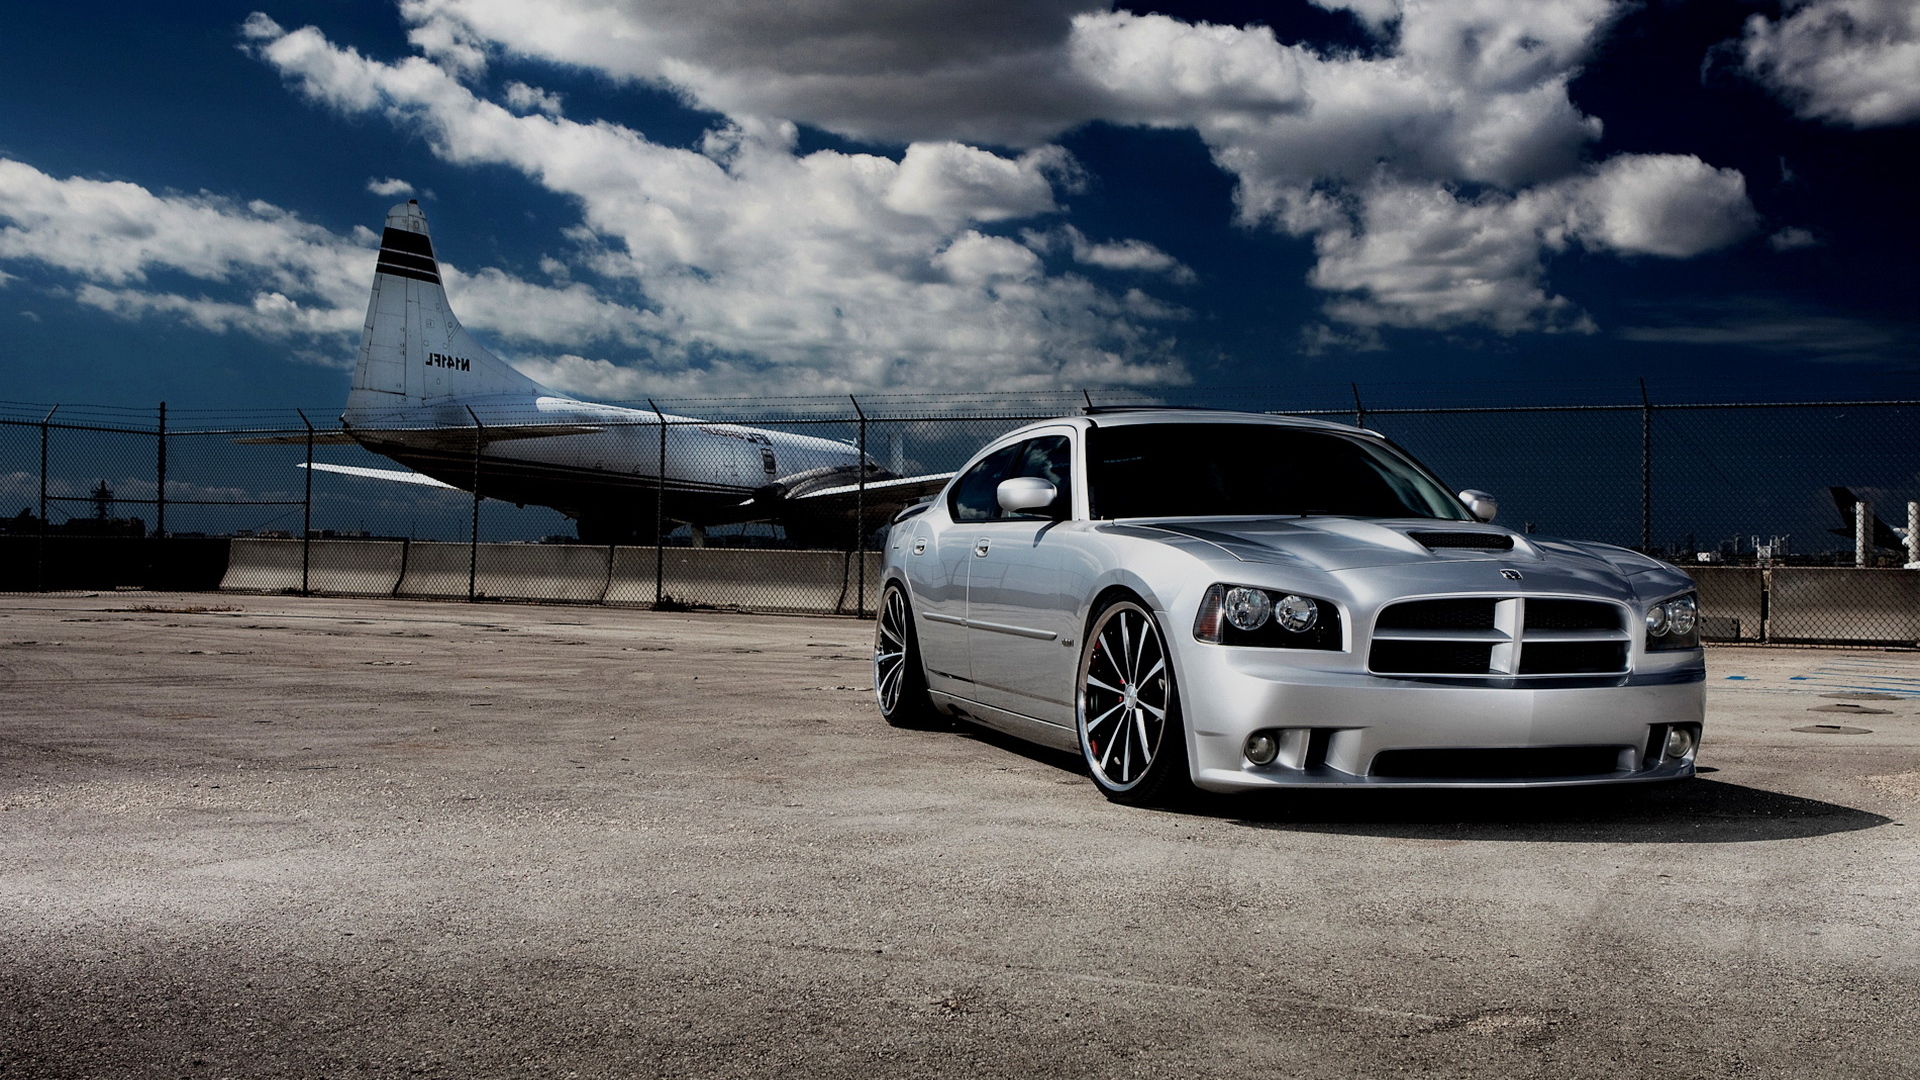 Dodge-Charger